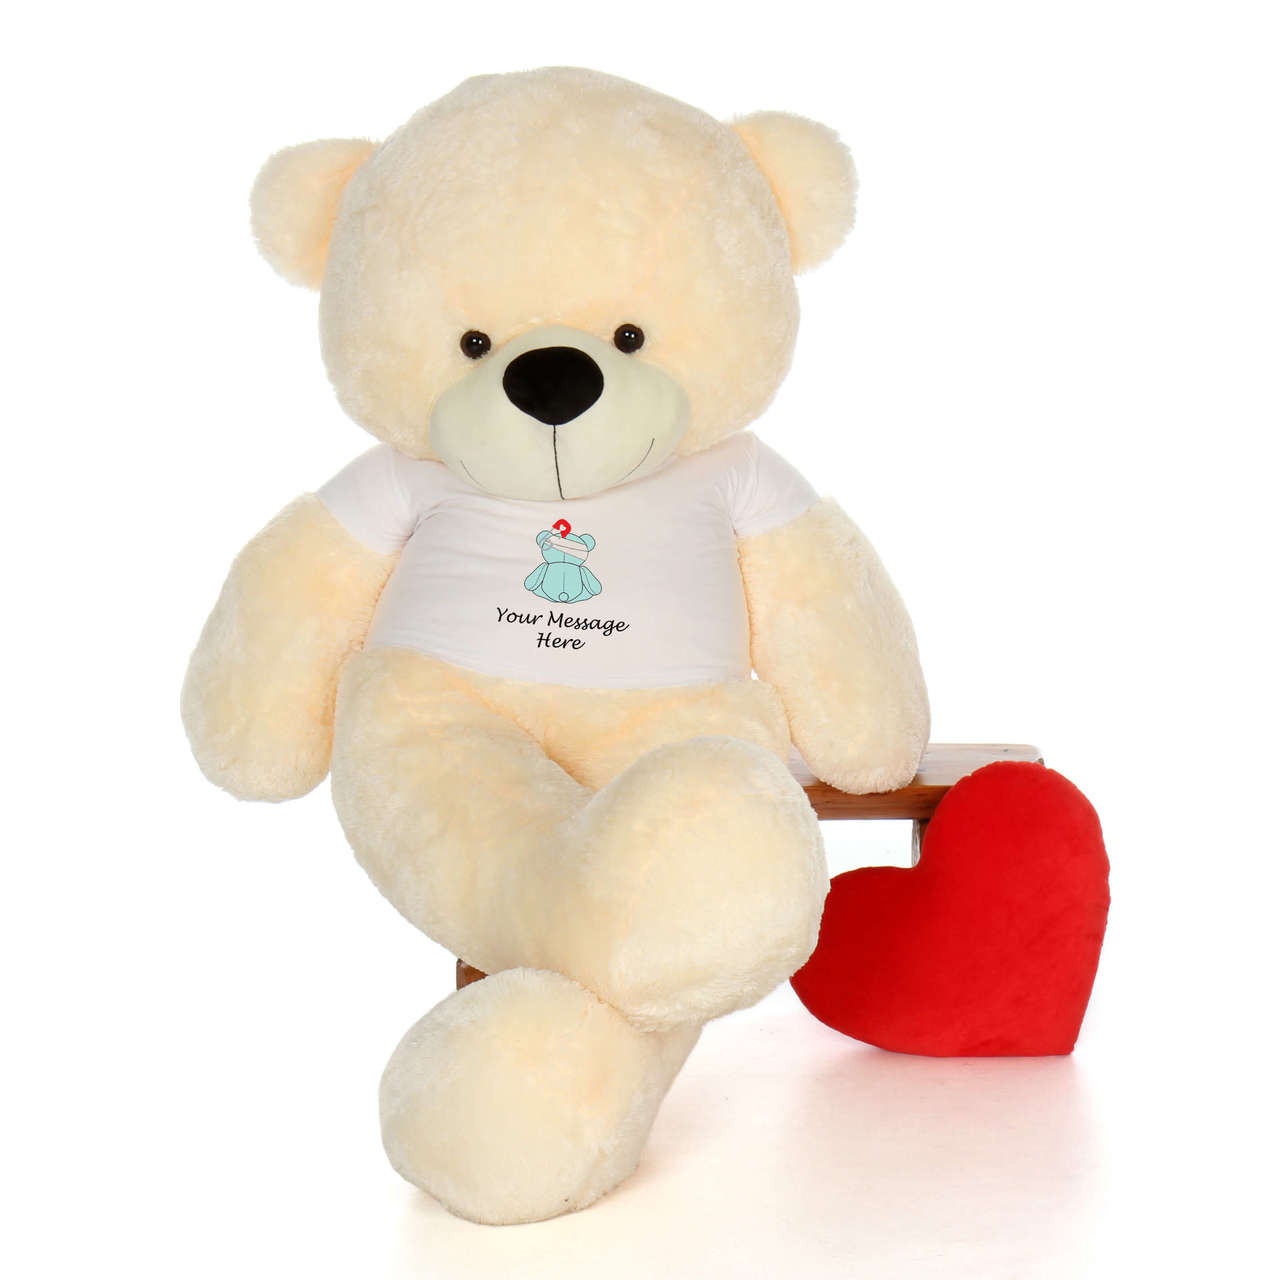 Huggable 6ft Cream Giant Teddy Brand Get well Soon Teddy Bear With Personalized T-shirt